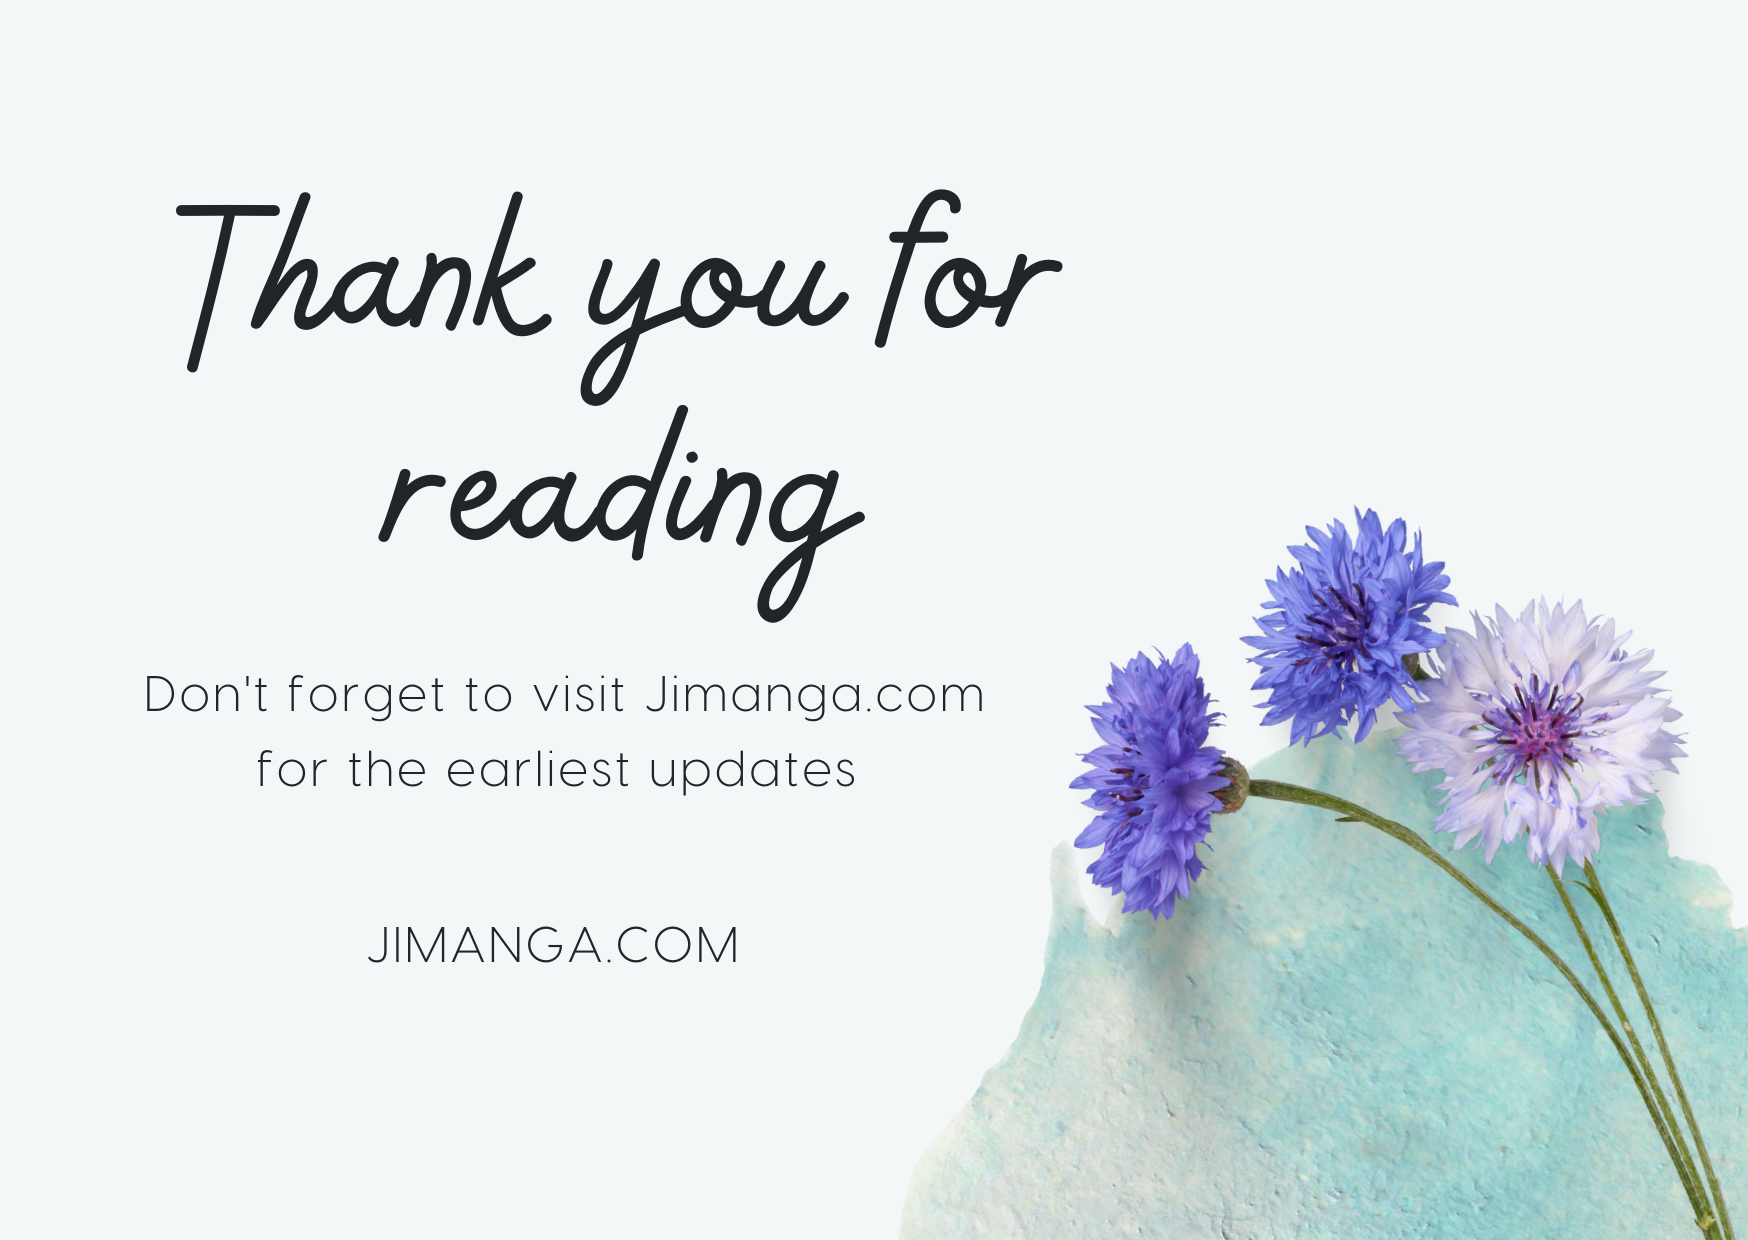 Thank you for reading